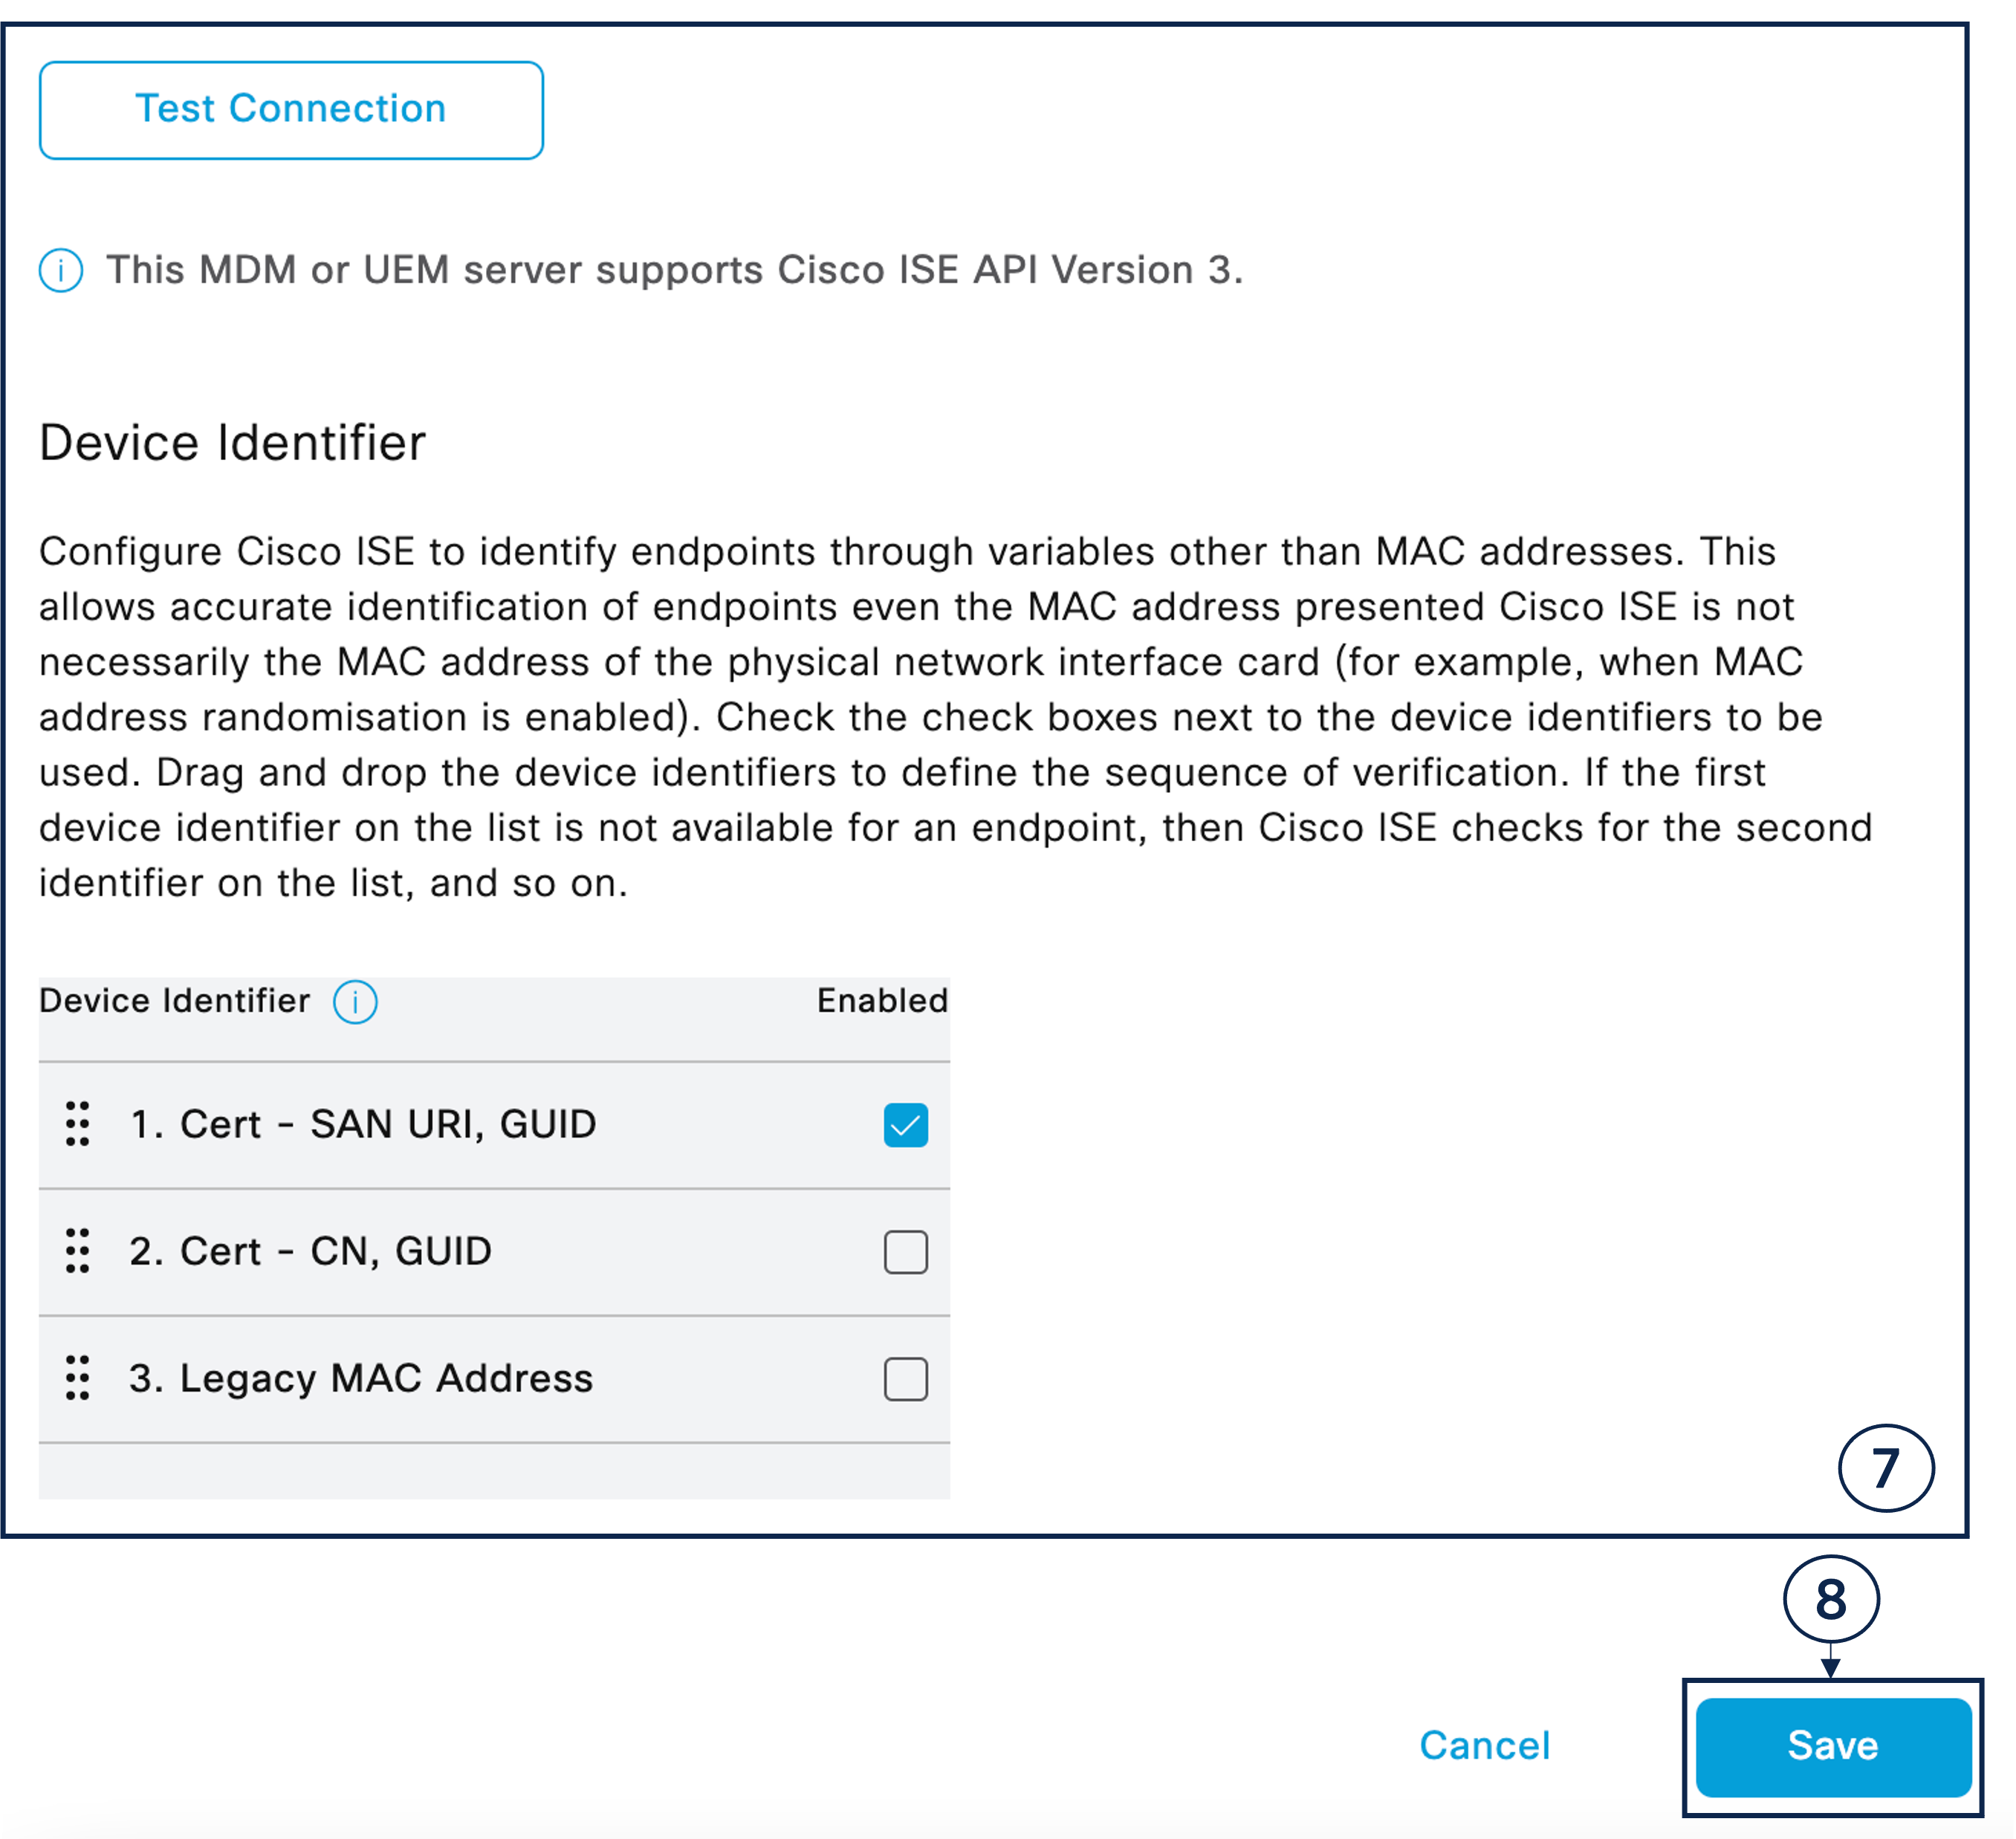 The Device Identifier section on the MDM window in Cisco ISE where you can choose the unique device identifiers to query an MDM server for.